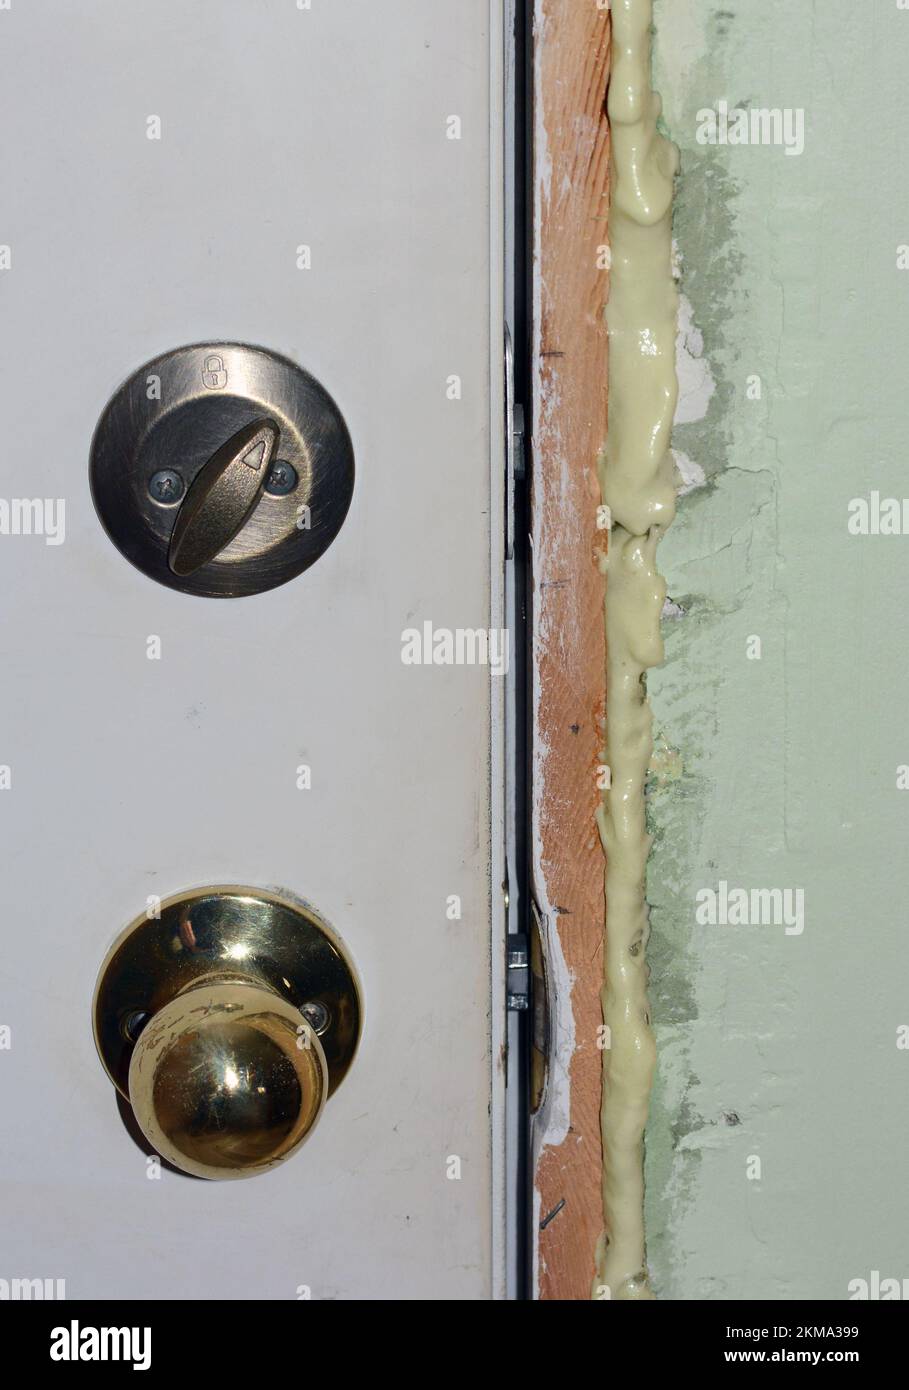 Expanding spray foam insultation is used to fill the cracks around an exterior door in an older construction remodeling project. Stock Photo